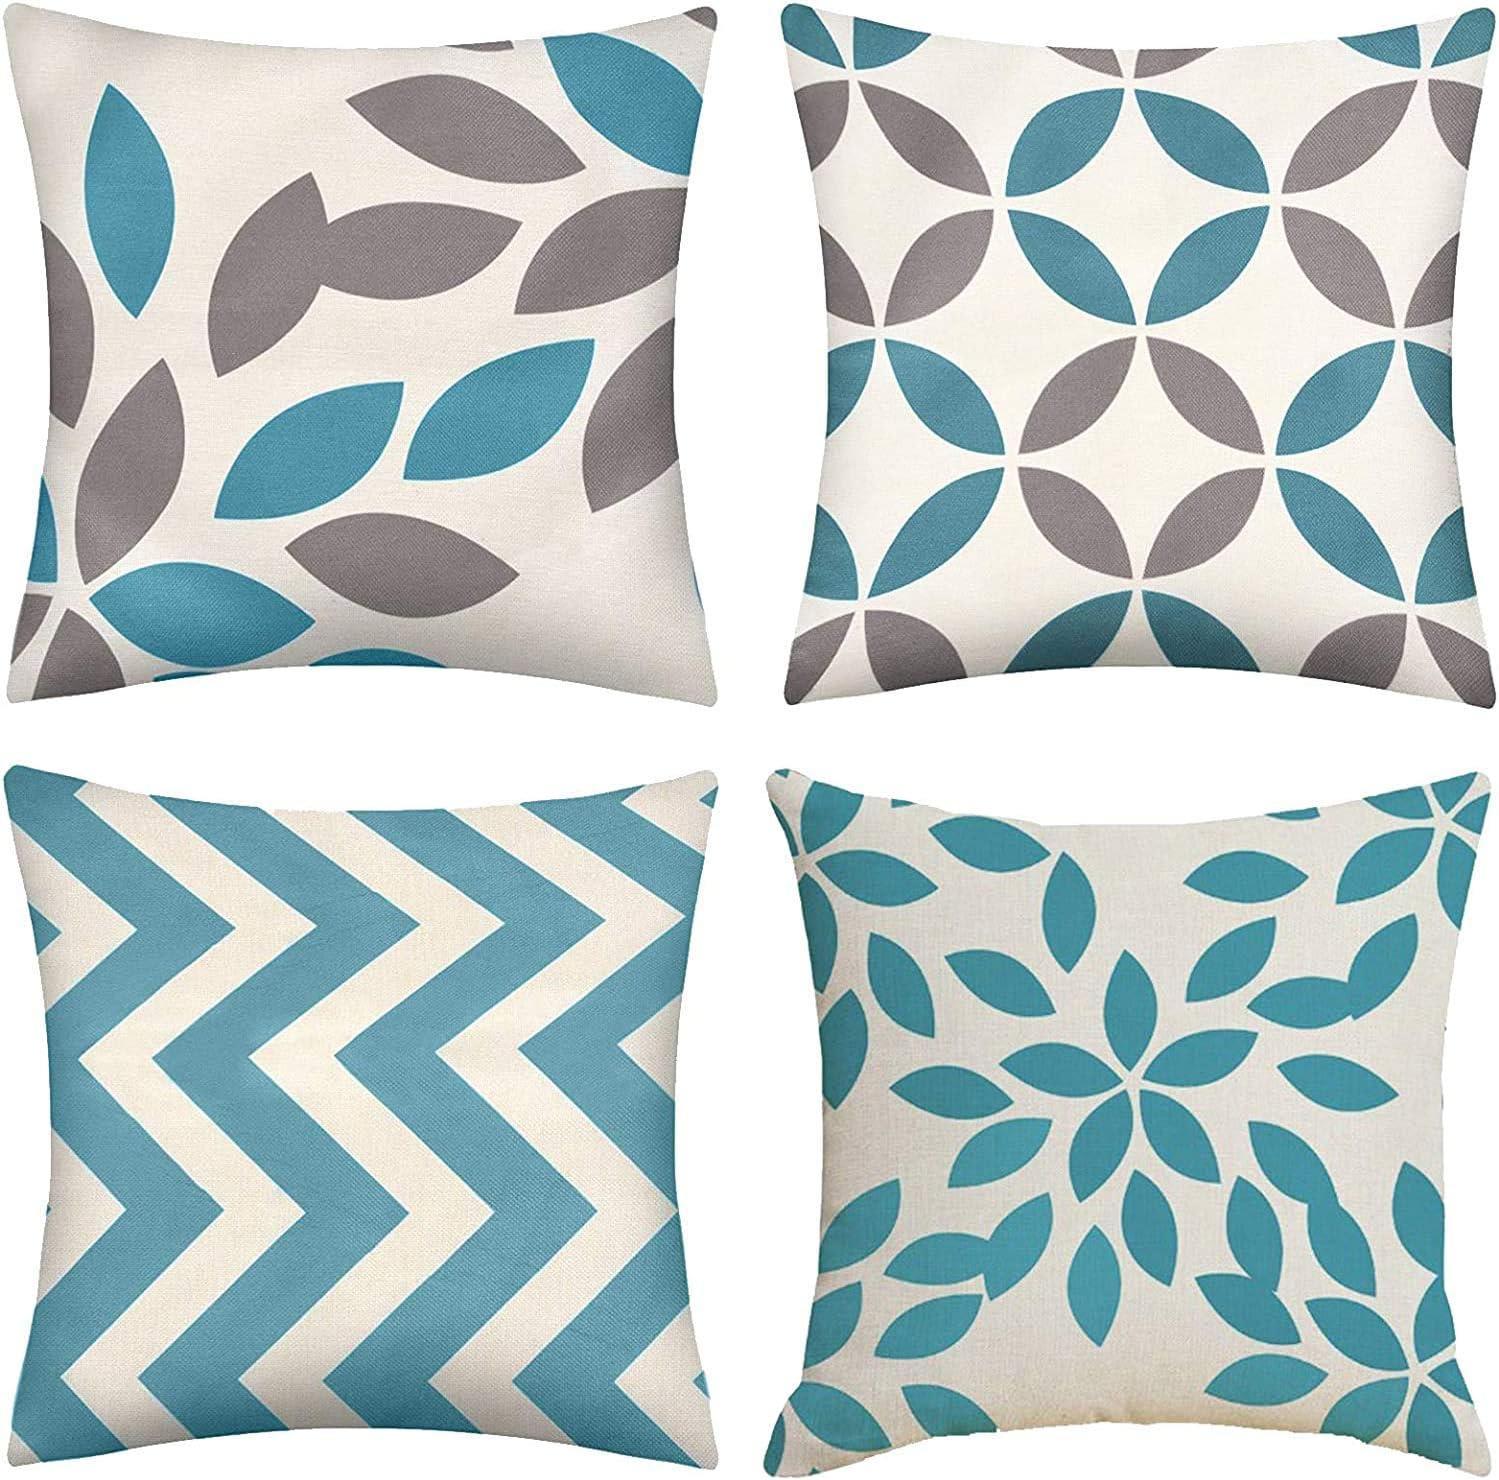 Set of 4 Geometric Decorative Cotton Linen Cushion Covers Modern Decorative Throw Pillow for Living